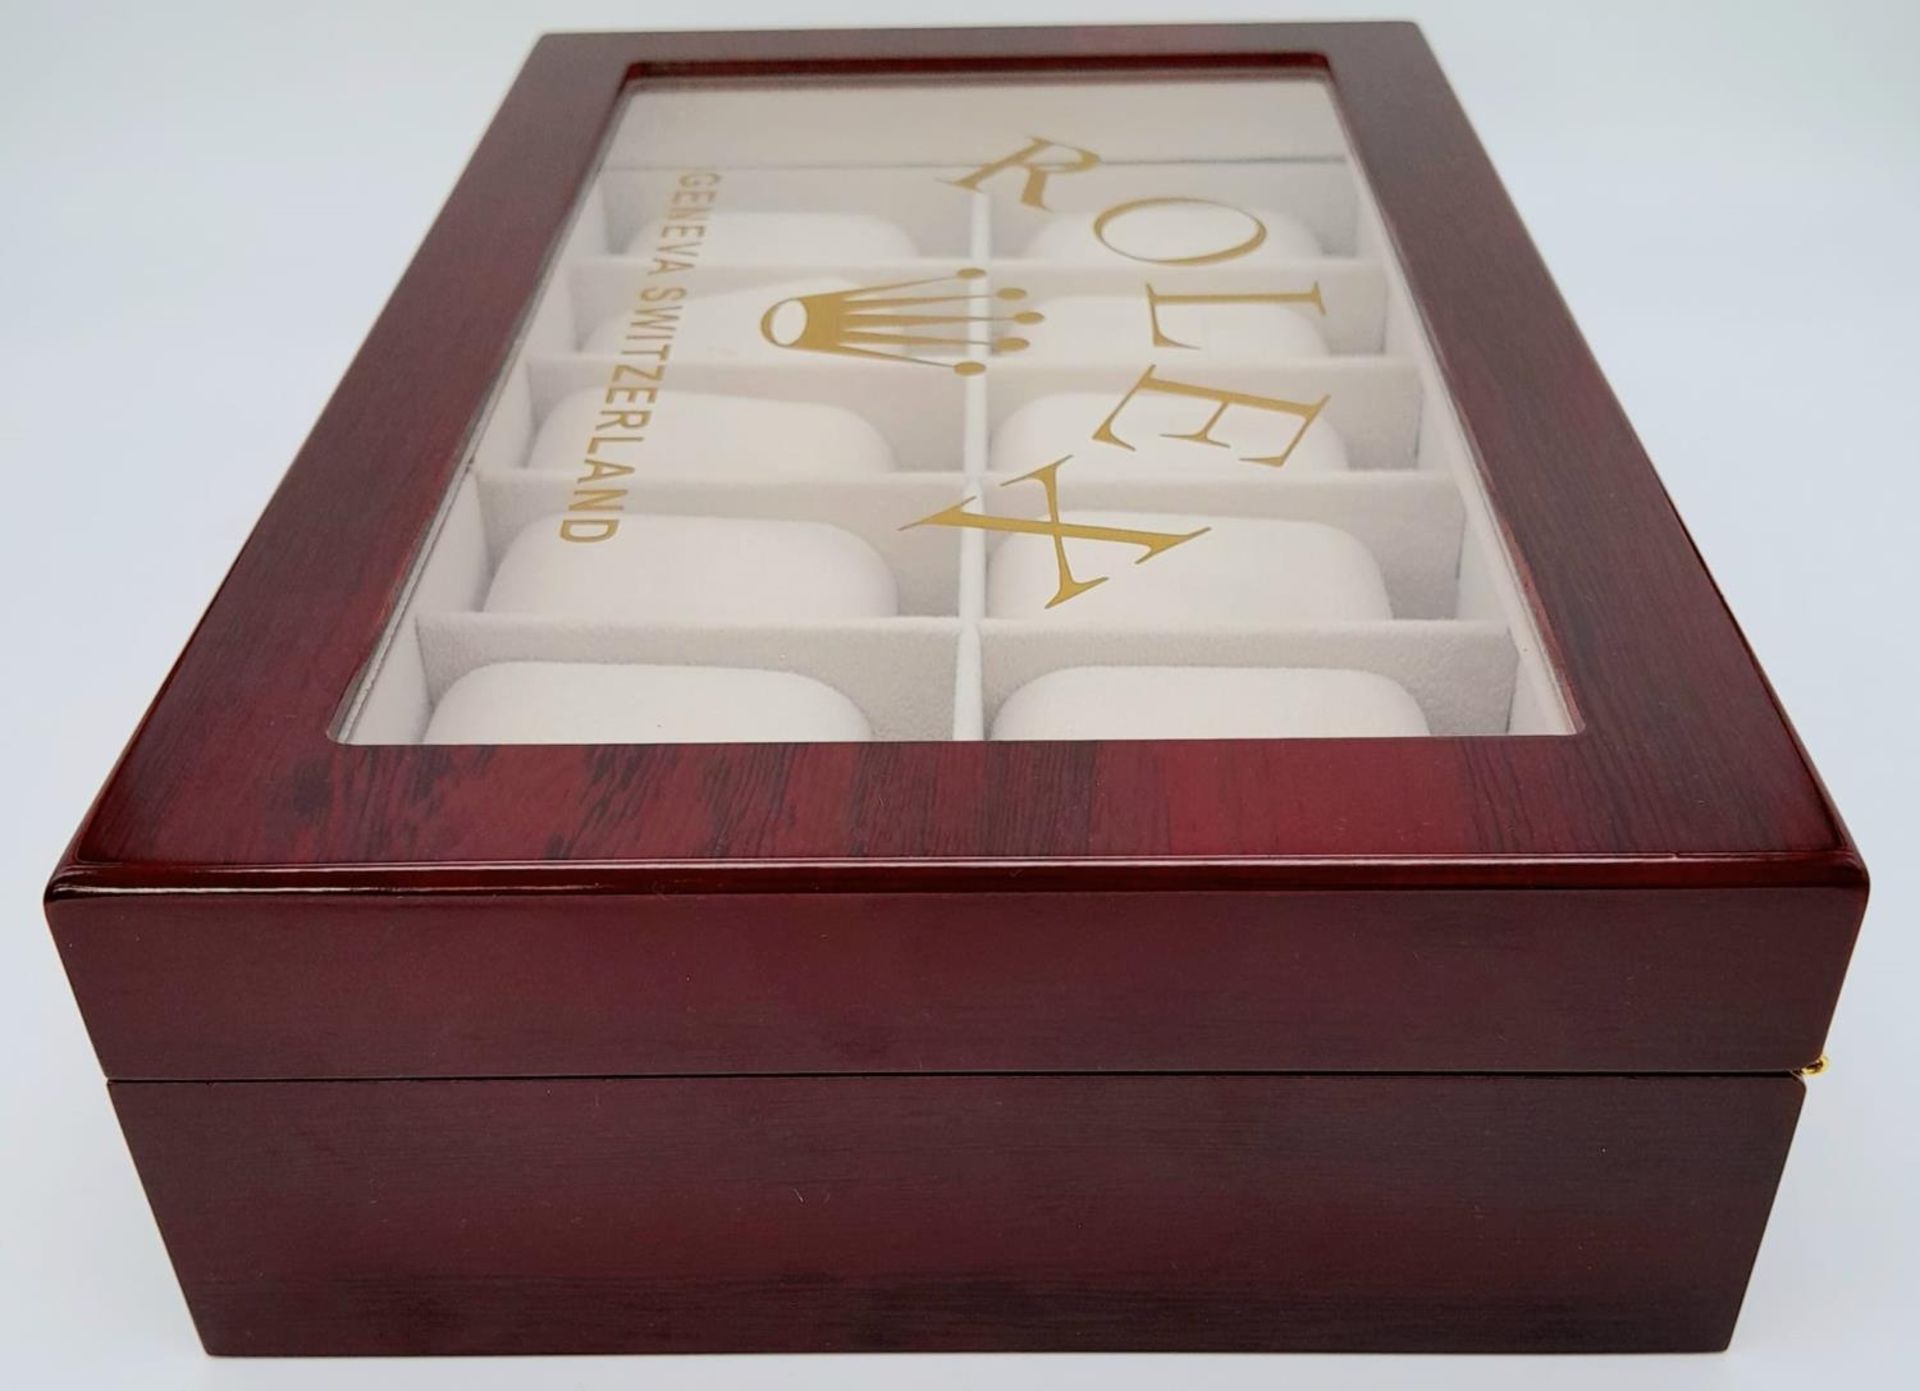 A high-quality ROLEX wooden watch case for 12 watches, made from high gloss cherry veneer and - Image 4 of 7